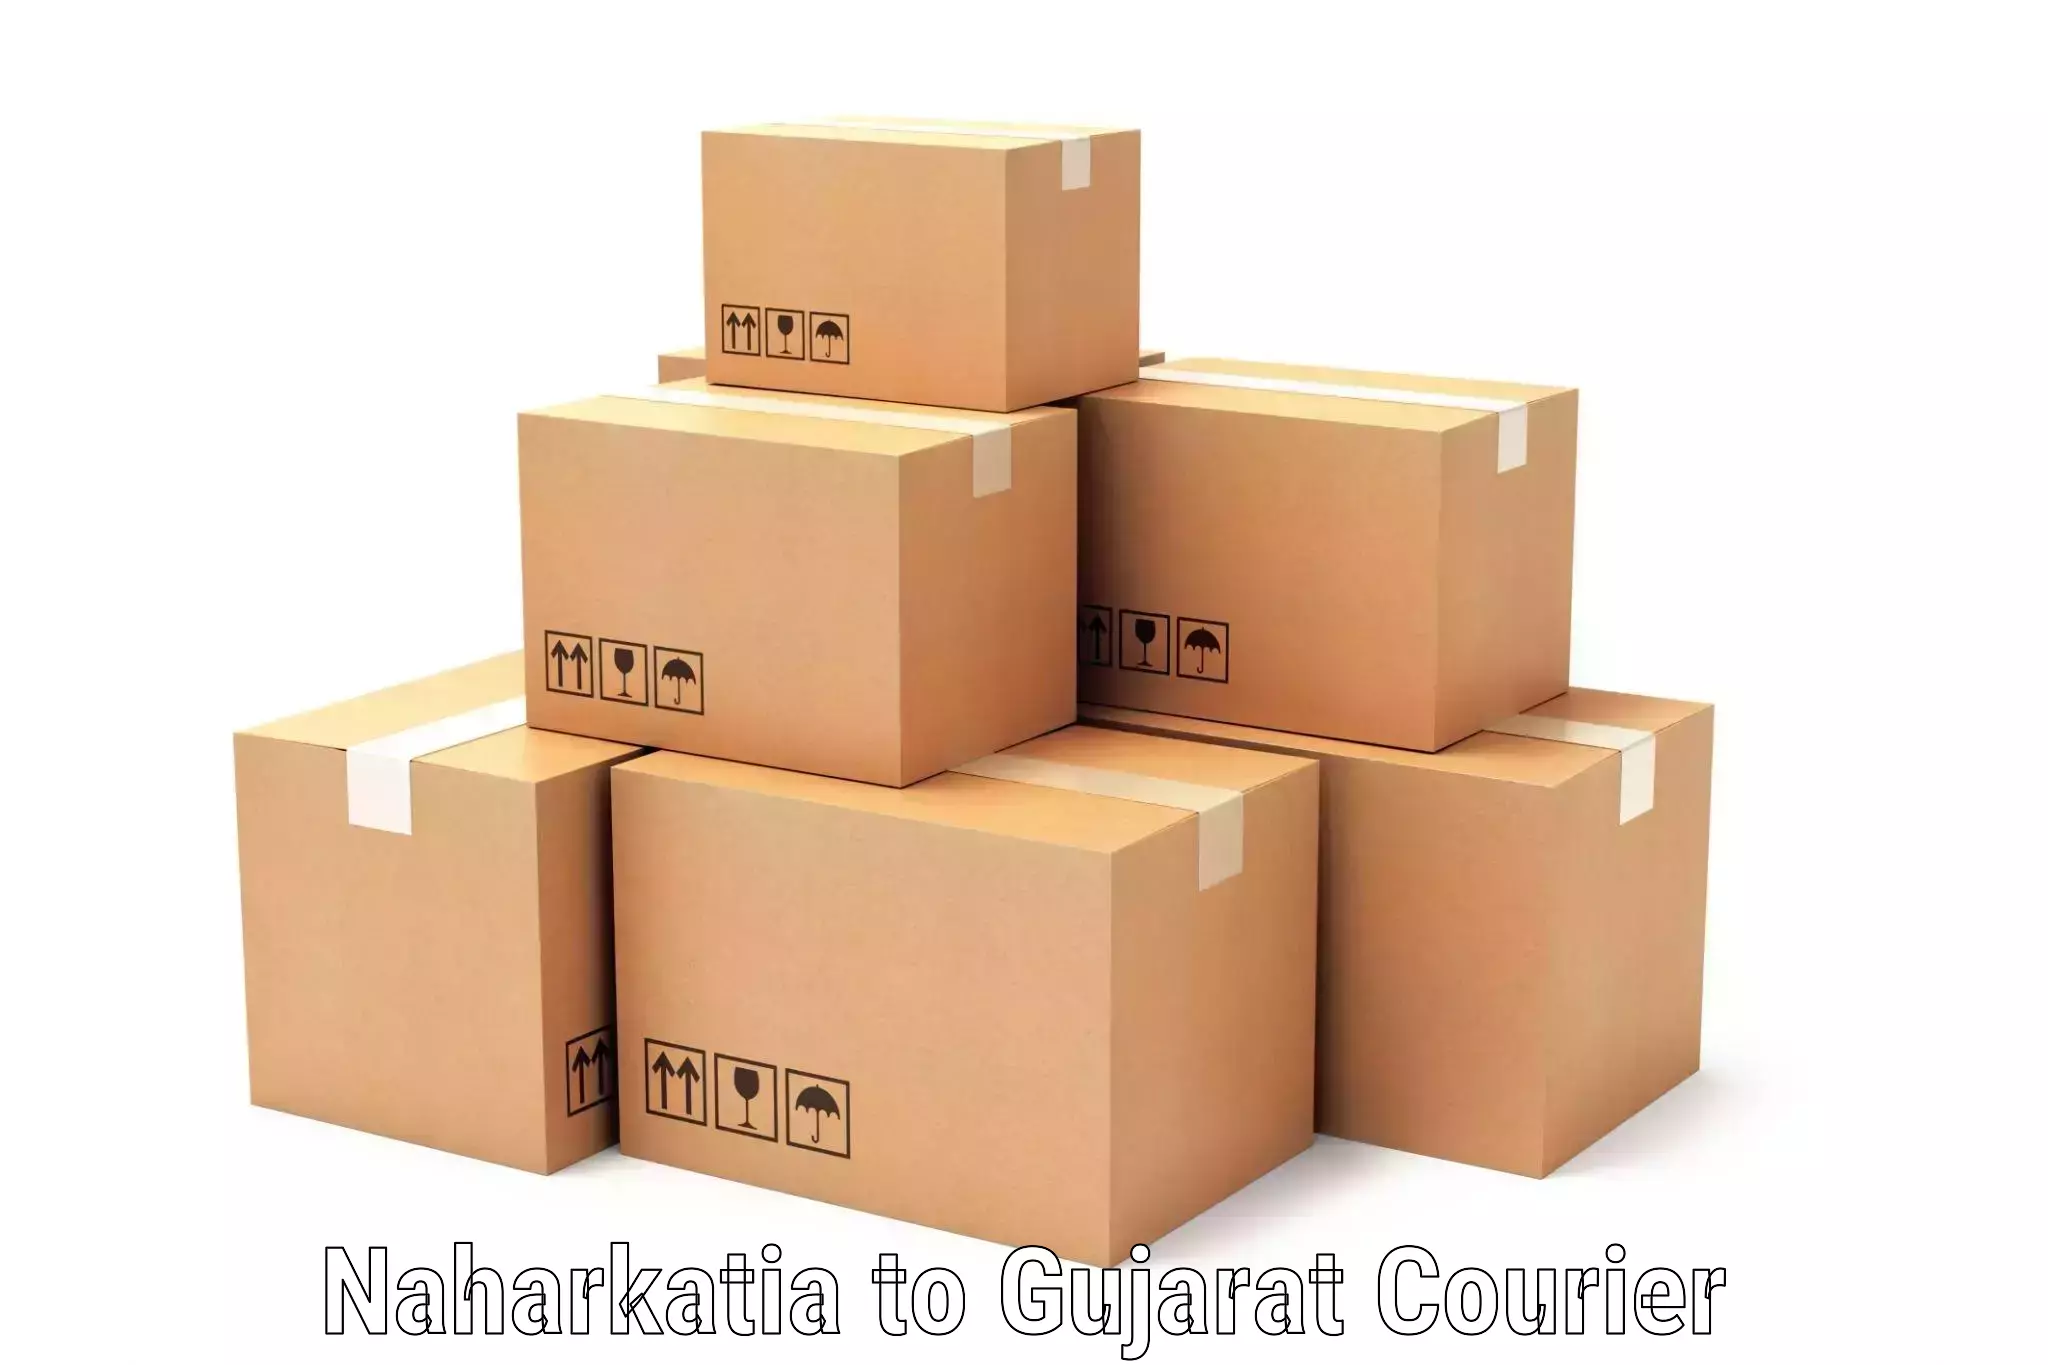 Global freight services Naharkatia to Ahmedabad